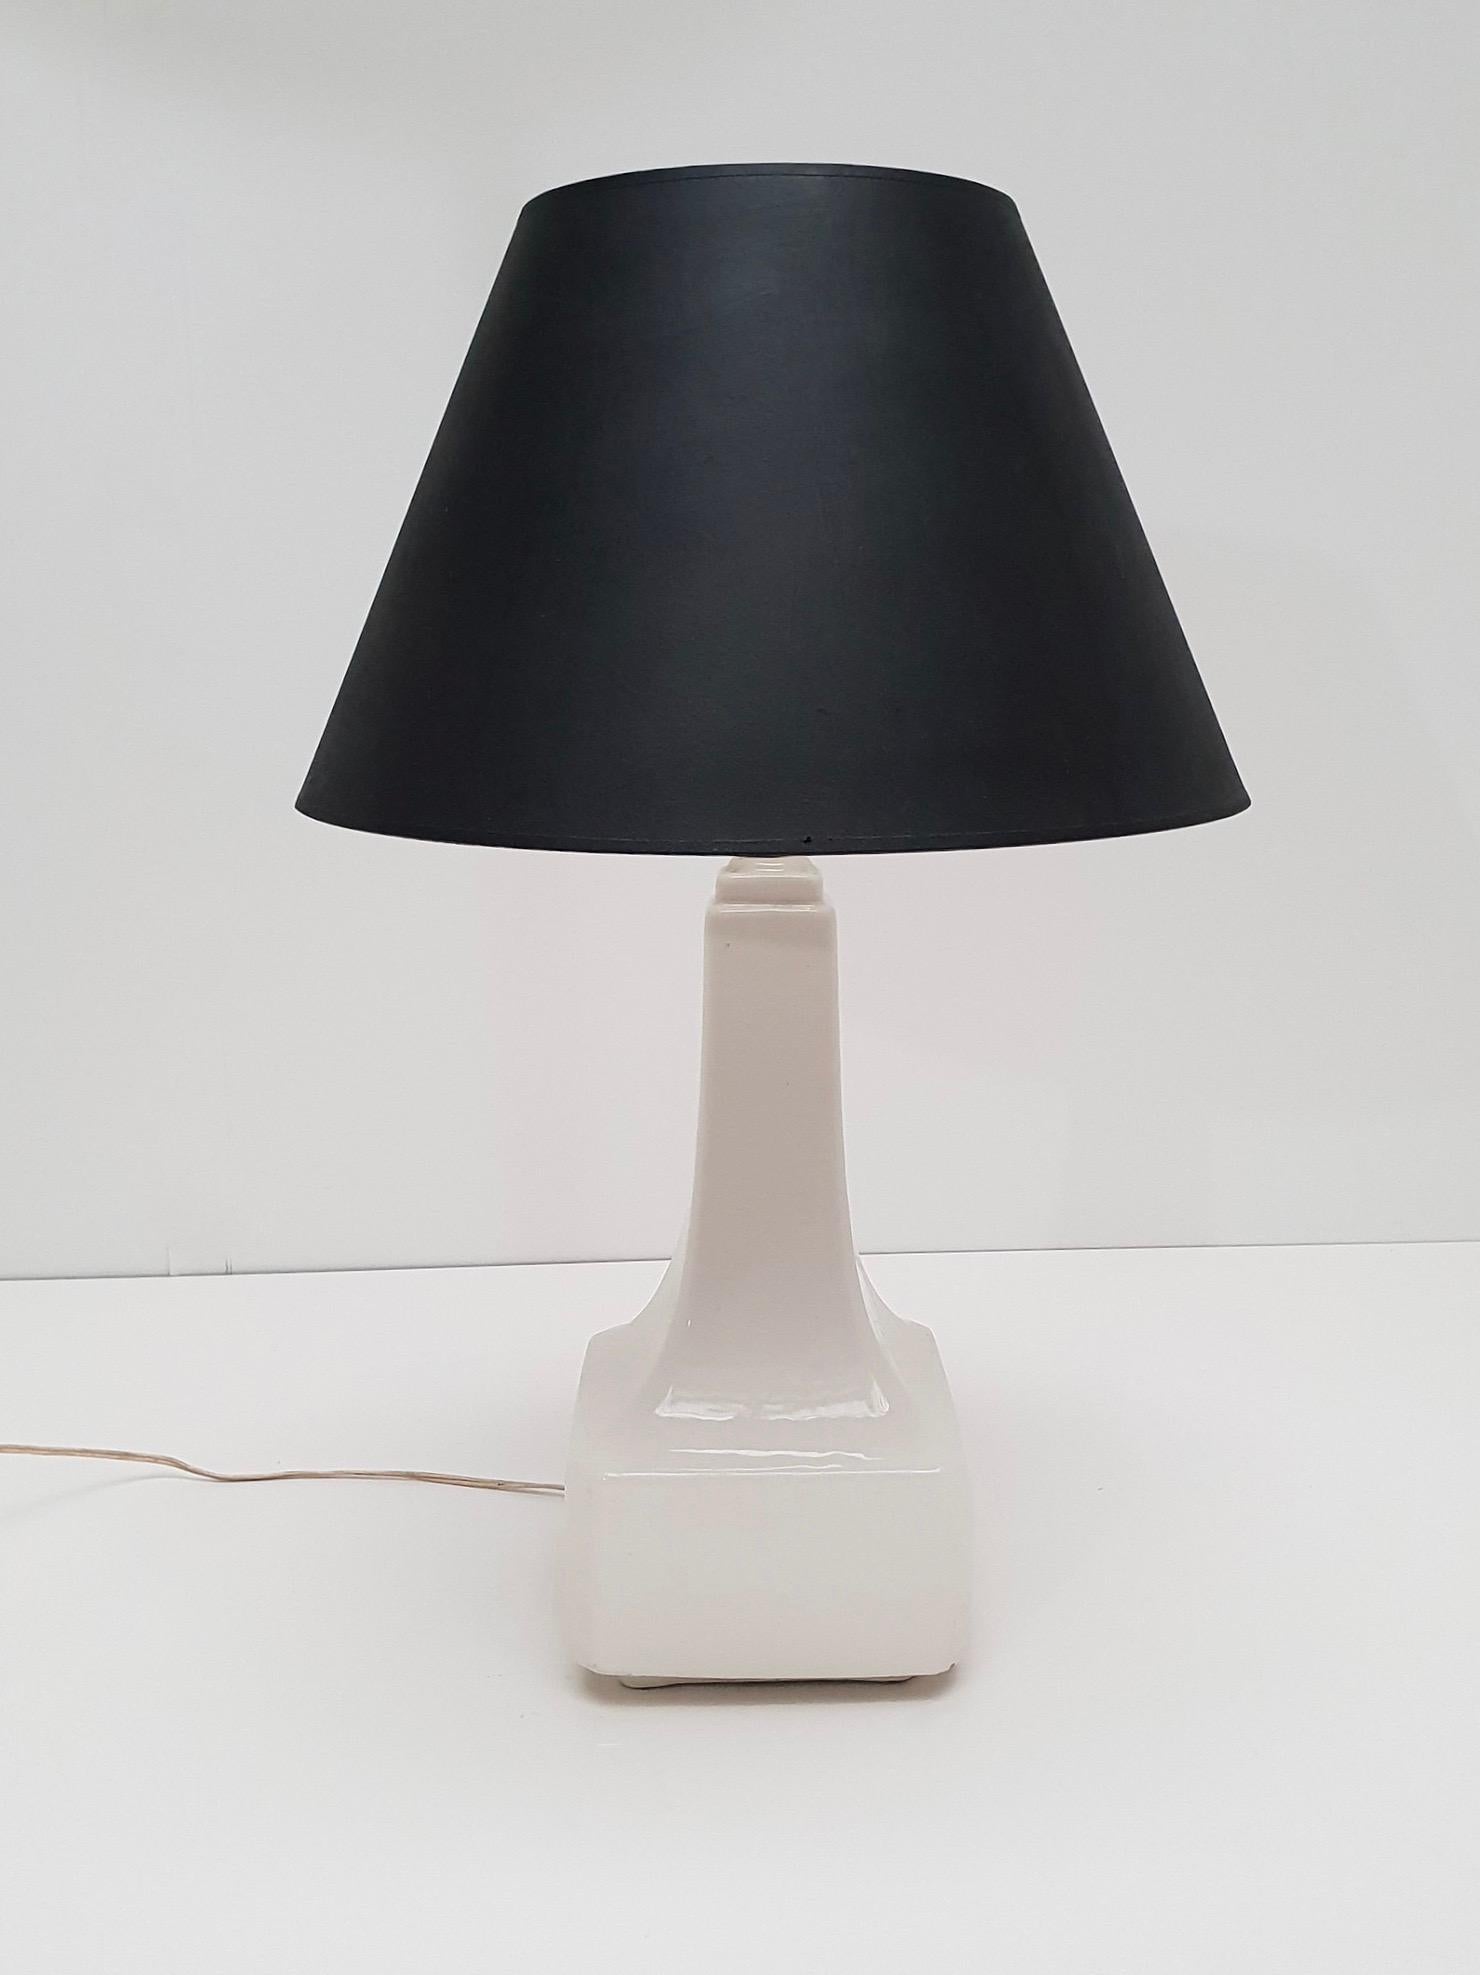 Wonderful ceramic table lamp in white glaze. It is signed on the side with a sticker 